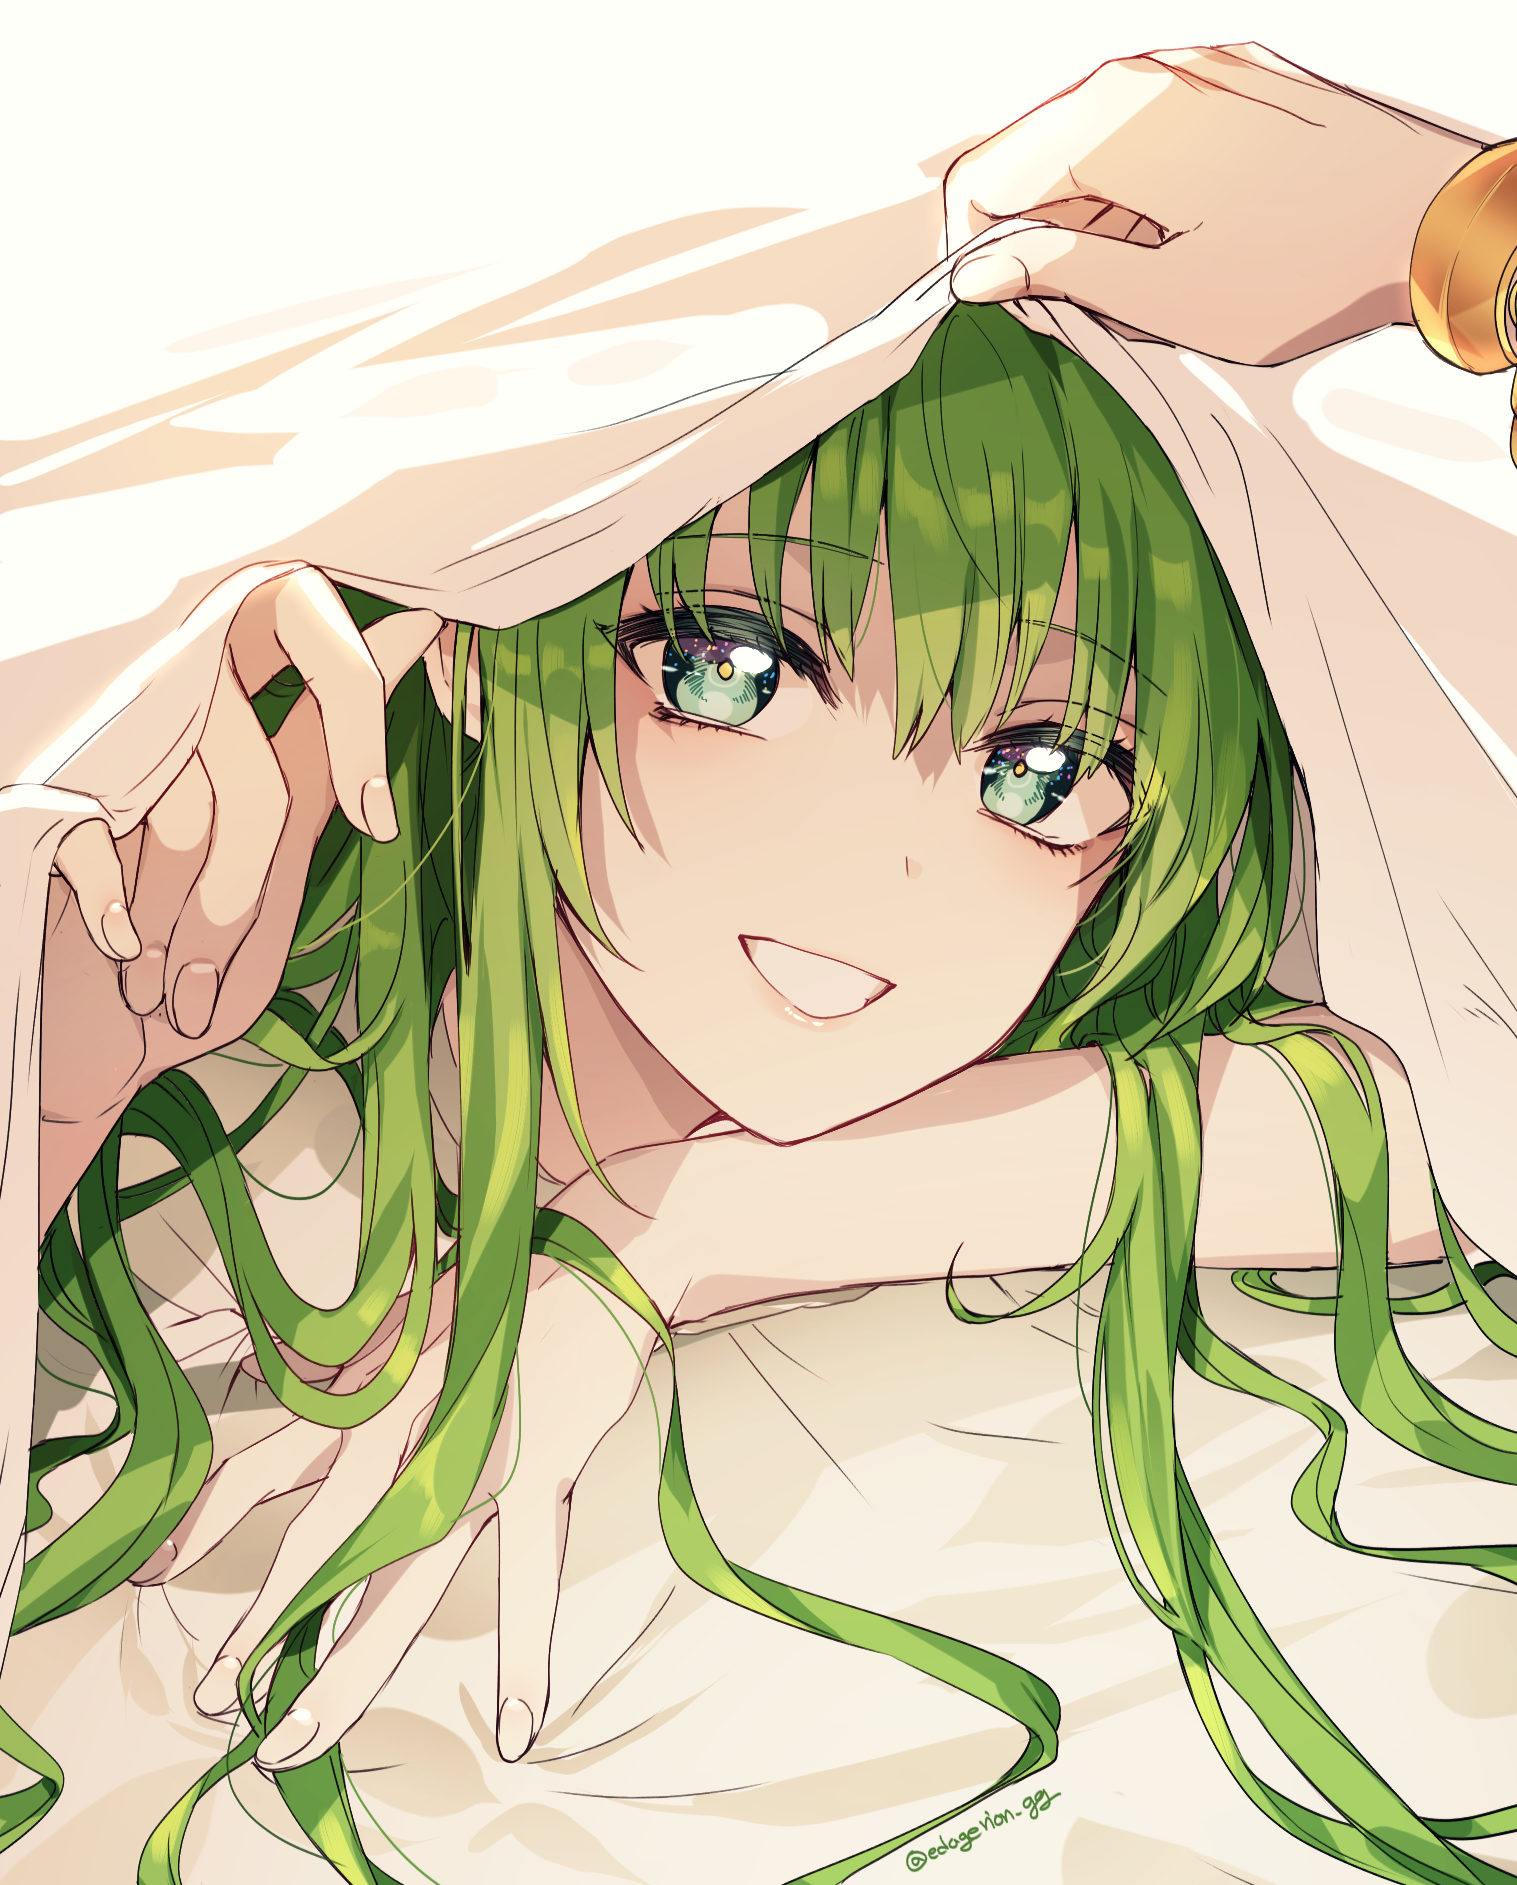 Fate Series FGO Fate Grand Order Anime Boys Long Hair 2D Smiling White Bed Sheets Messy Hair Enkidu  1517x1885